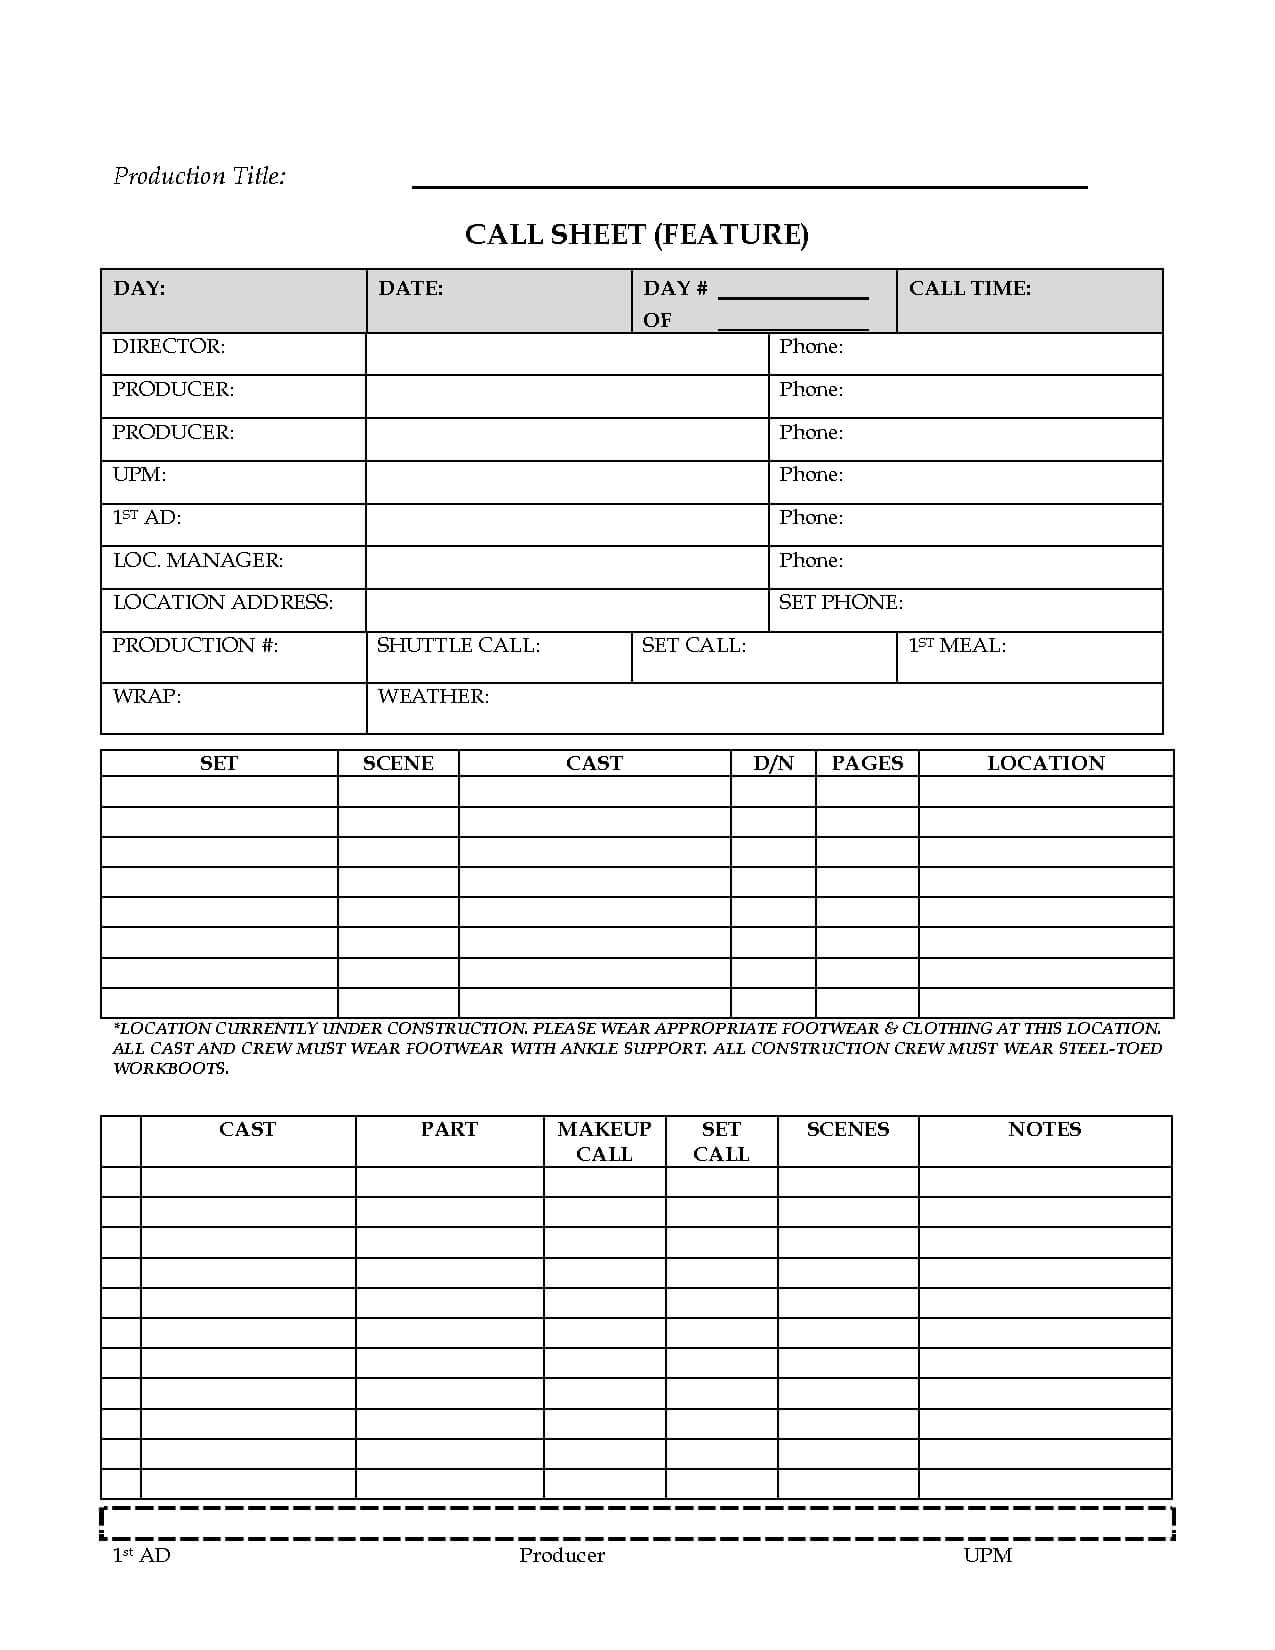 Awesome Call Sheet (Feature) Template Sample For Film Throughout Film Call Sheet Template Word